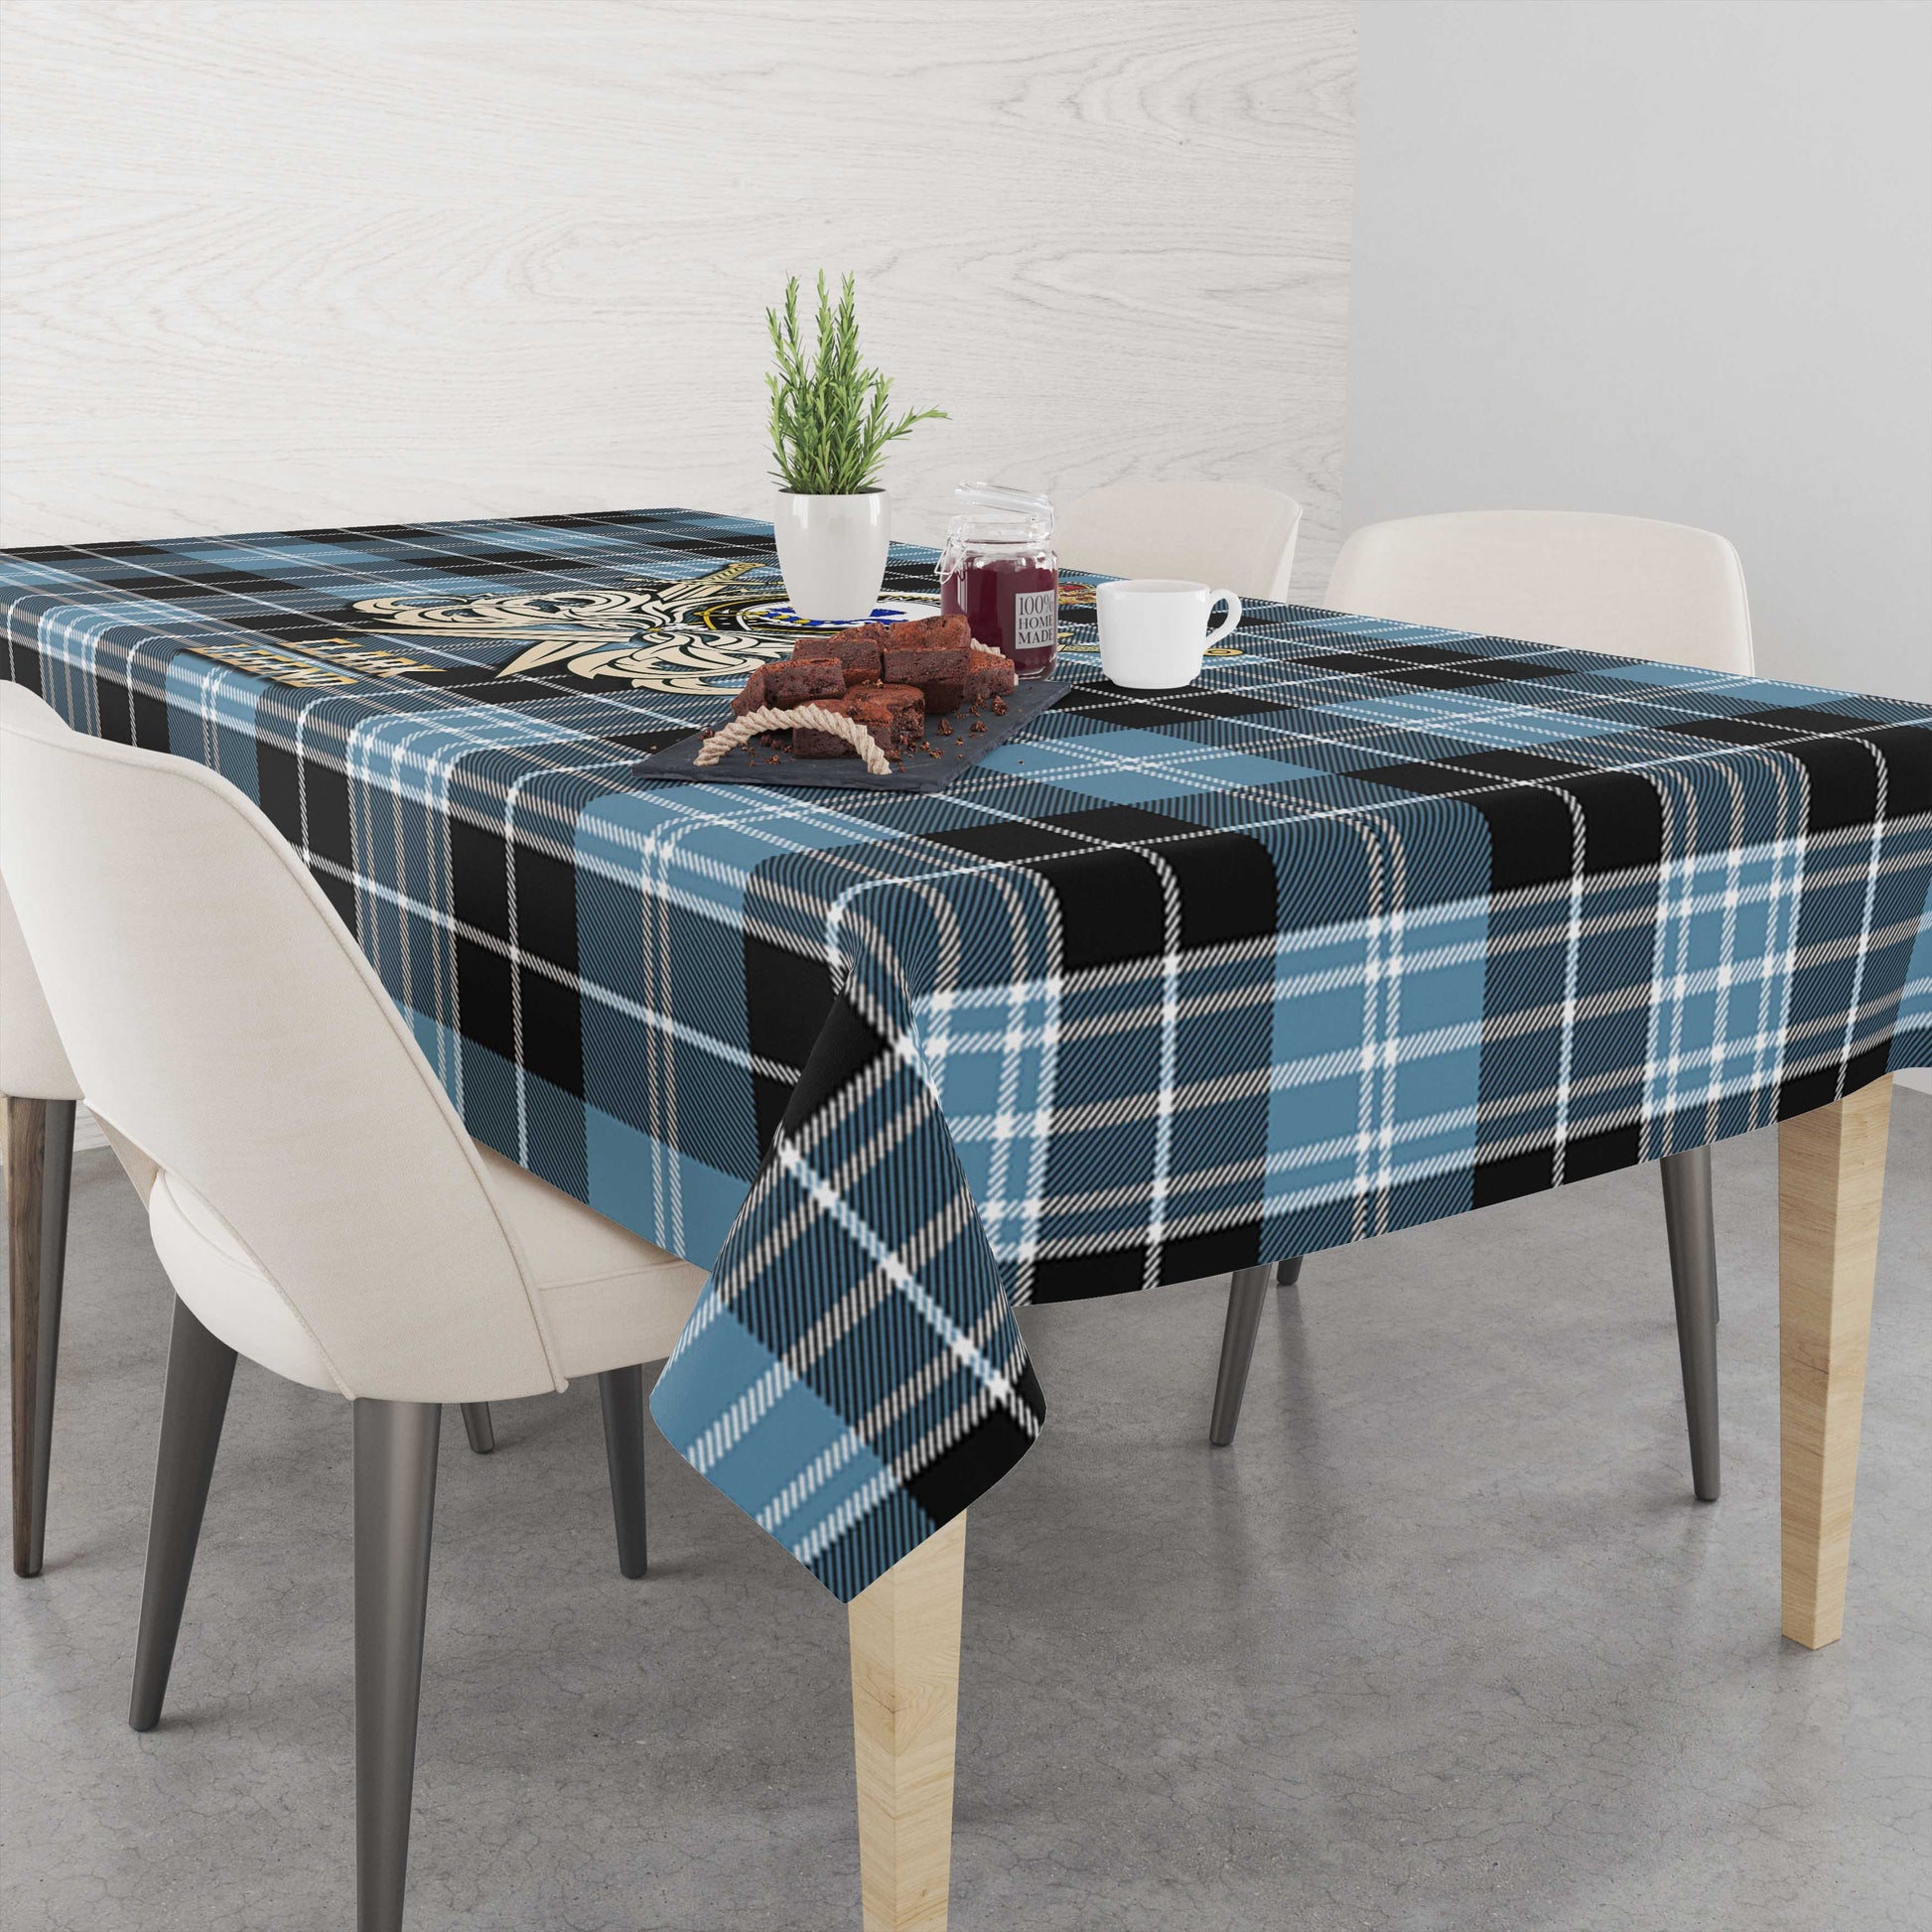 Tartan Vibes Clothing Clark (Lion) Ancient Tartan Tablecloth with Clan Crest and the Golden Sword of Courageous Legacy